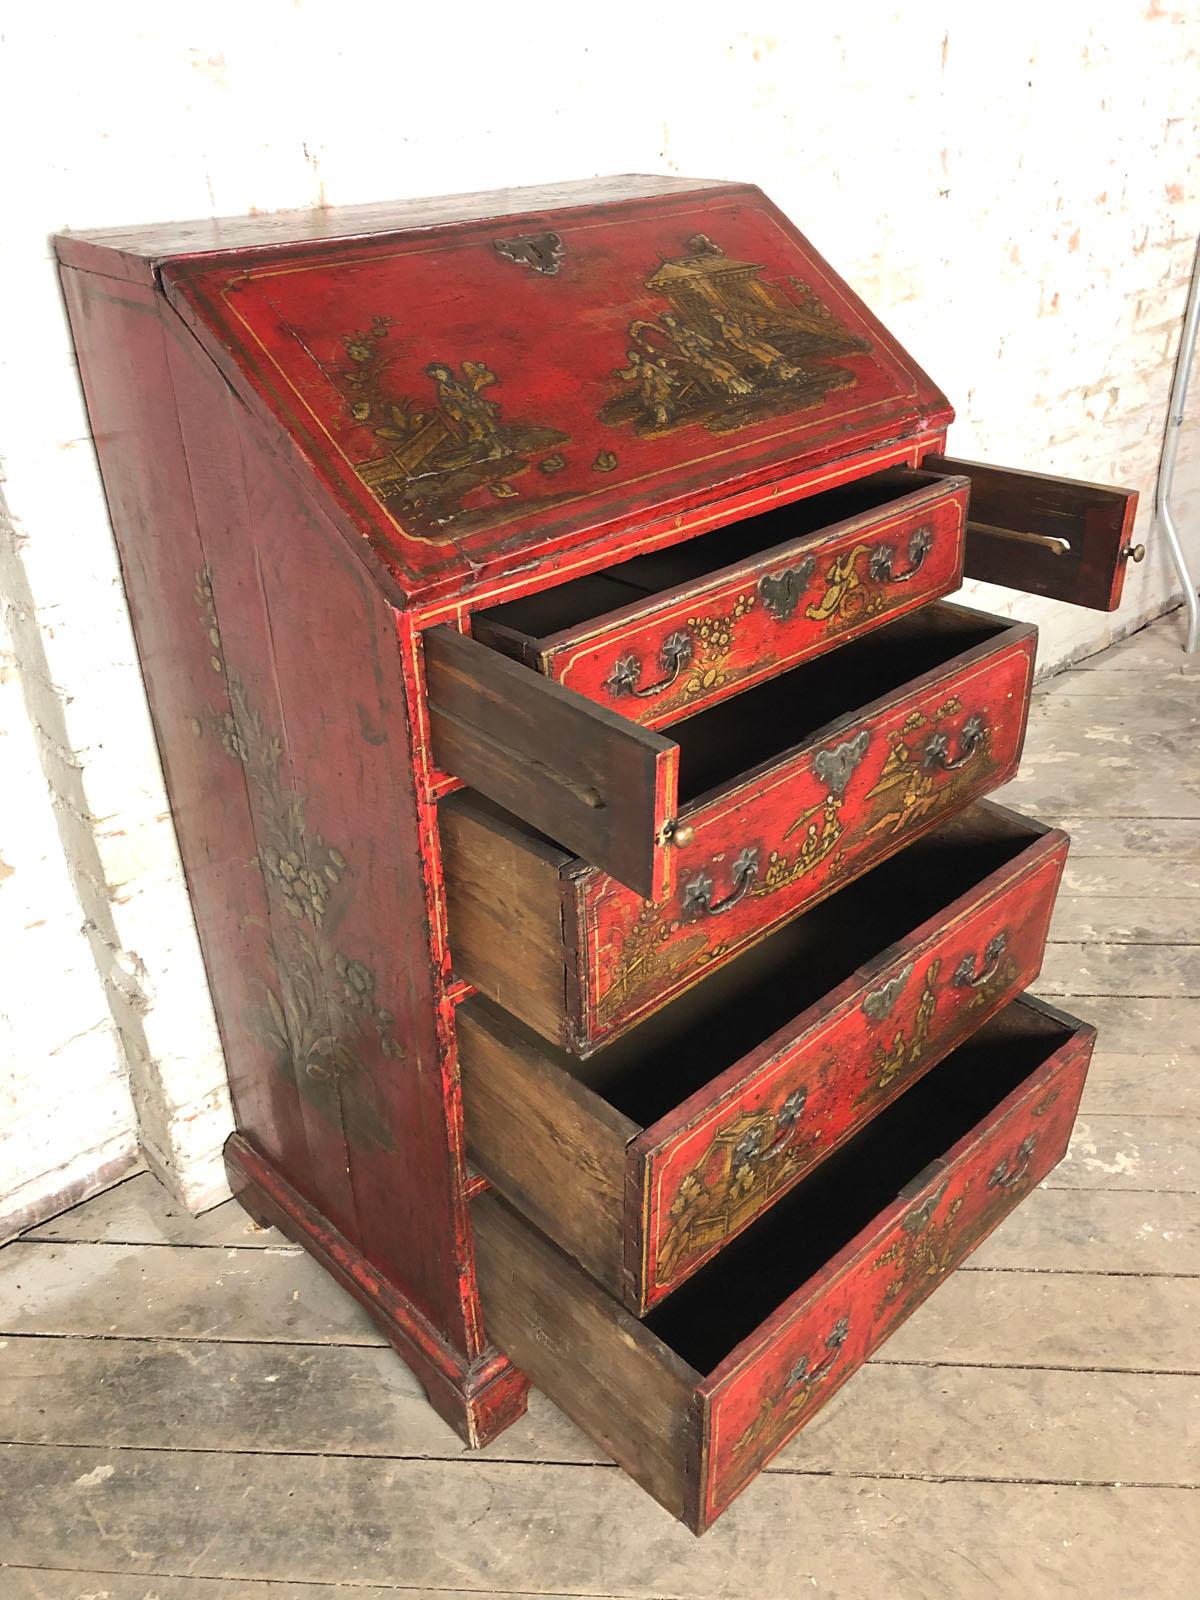 English Queen Anne, Early 18th Century Red Chinoiserie Lacquer Desk / Commode For Sale 5